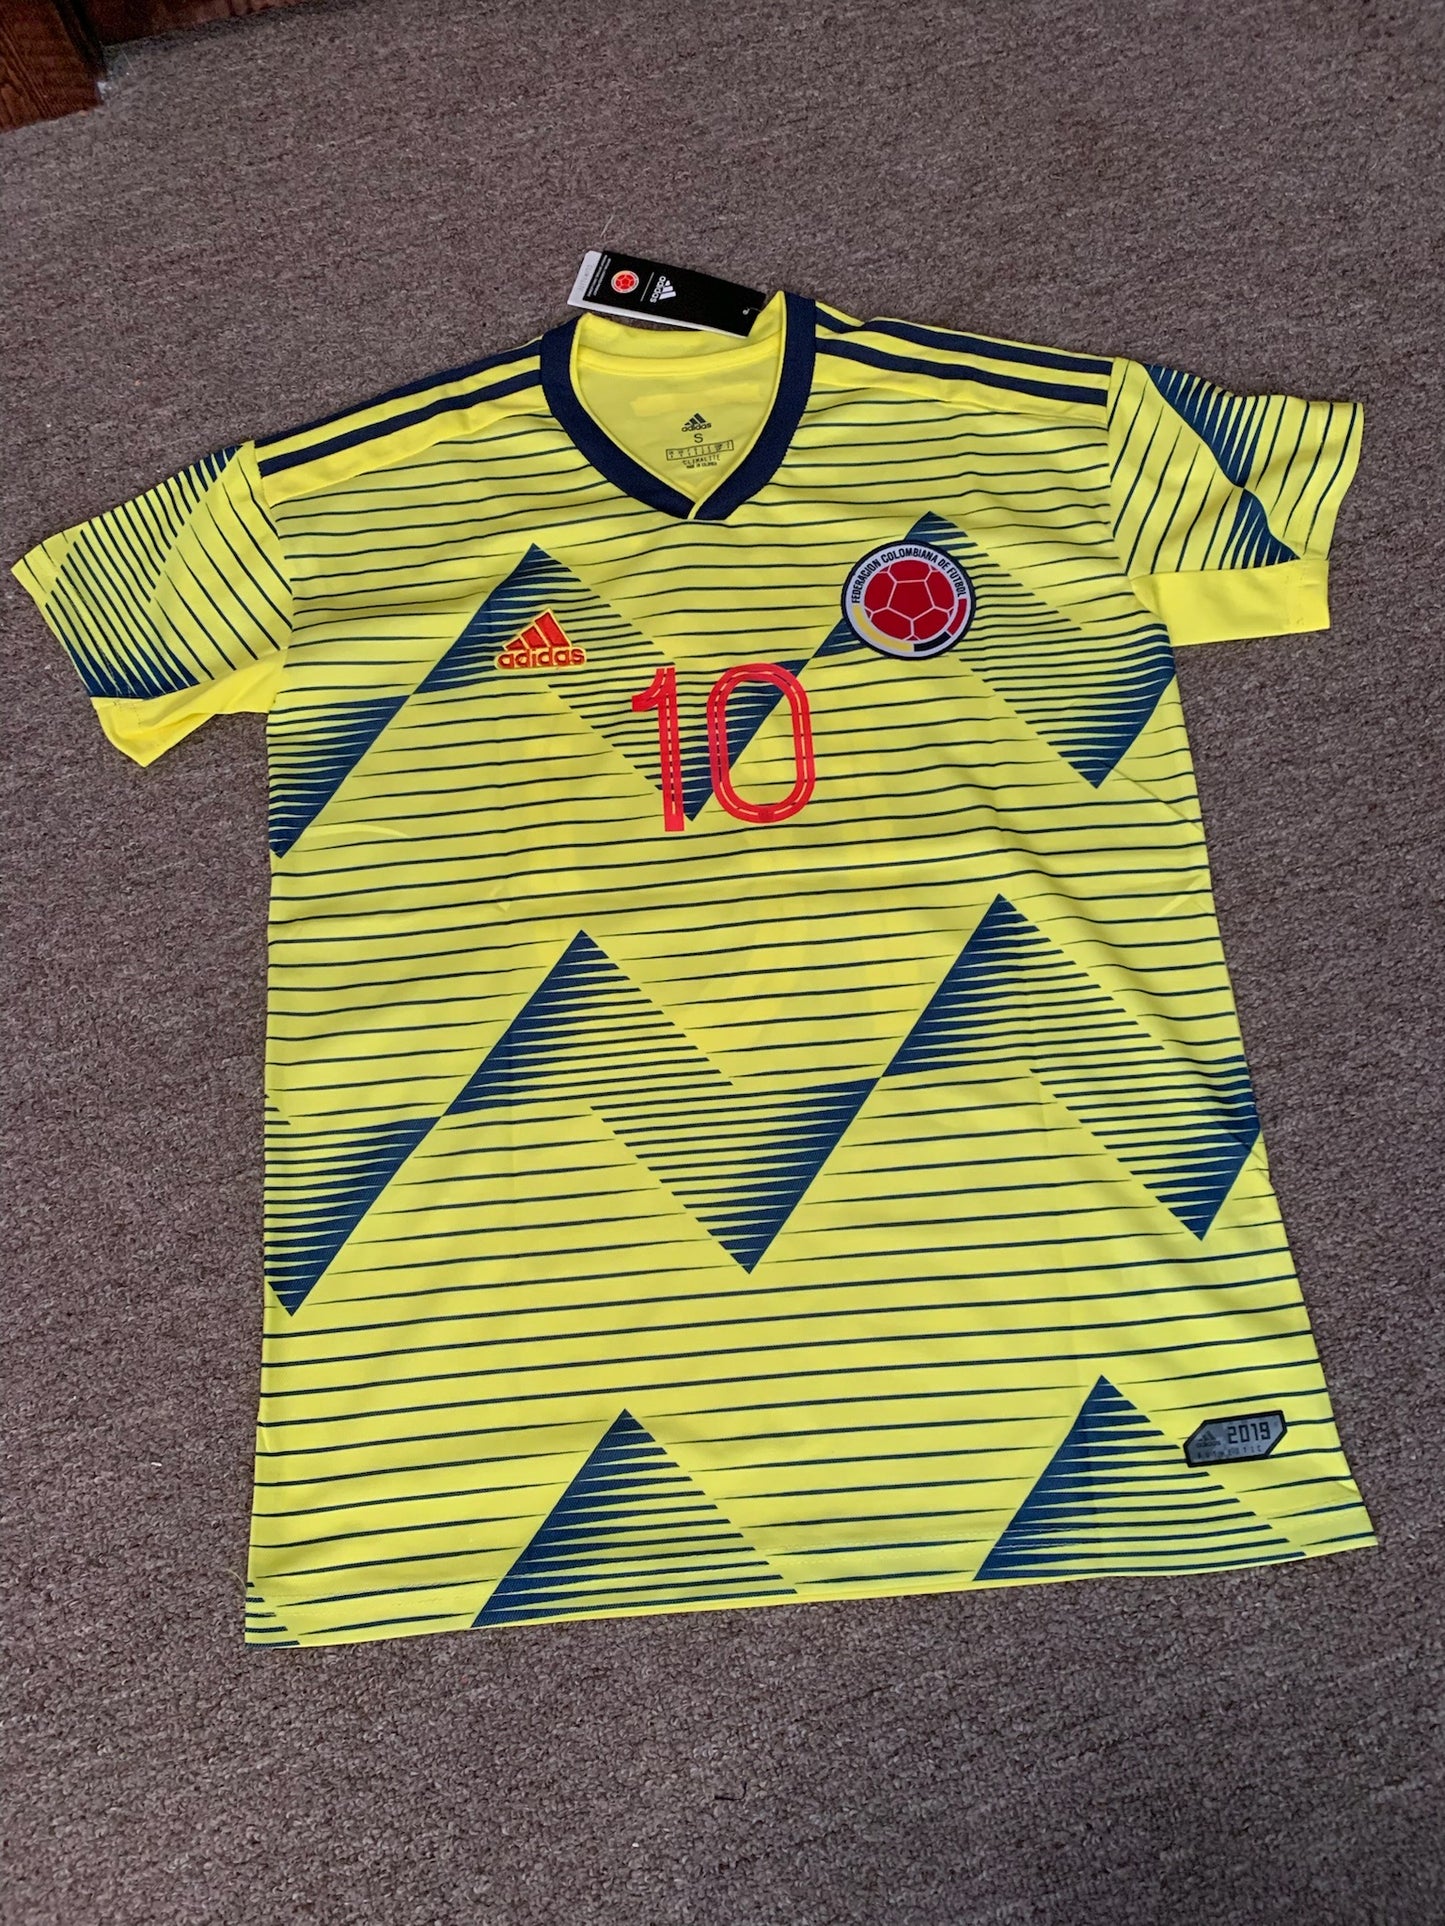 Colombia James Rodriguez H jersey